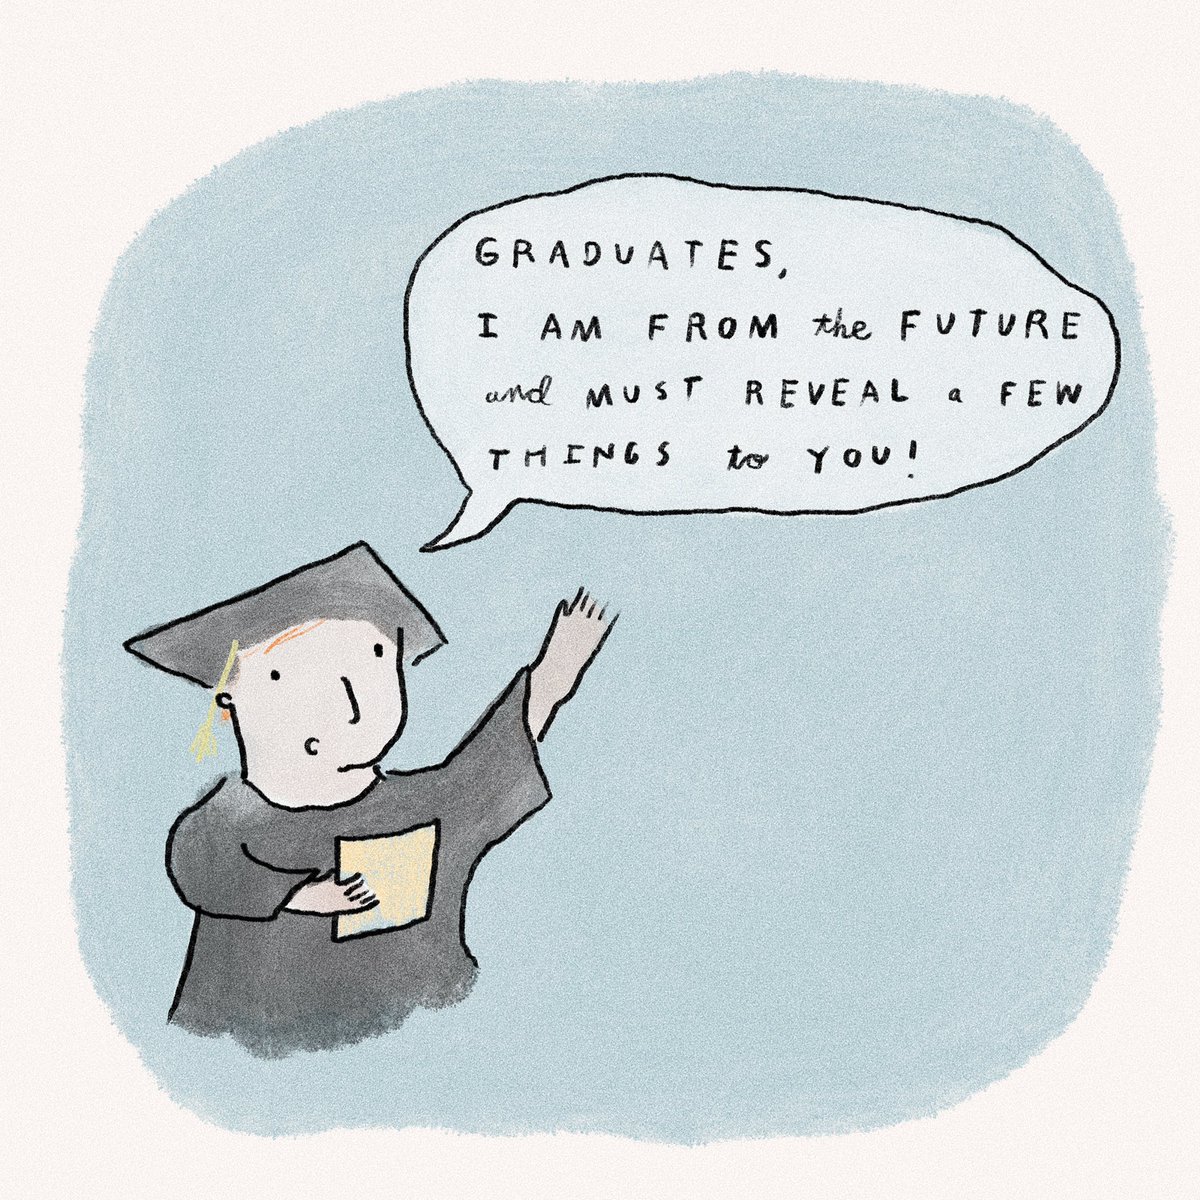 Graduates, I am from the future and must reveal a few things to you ...